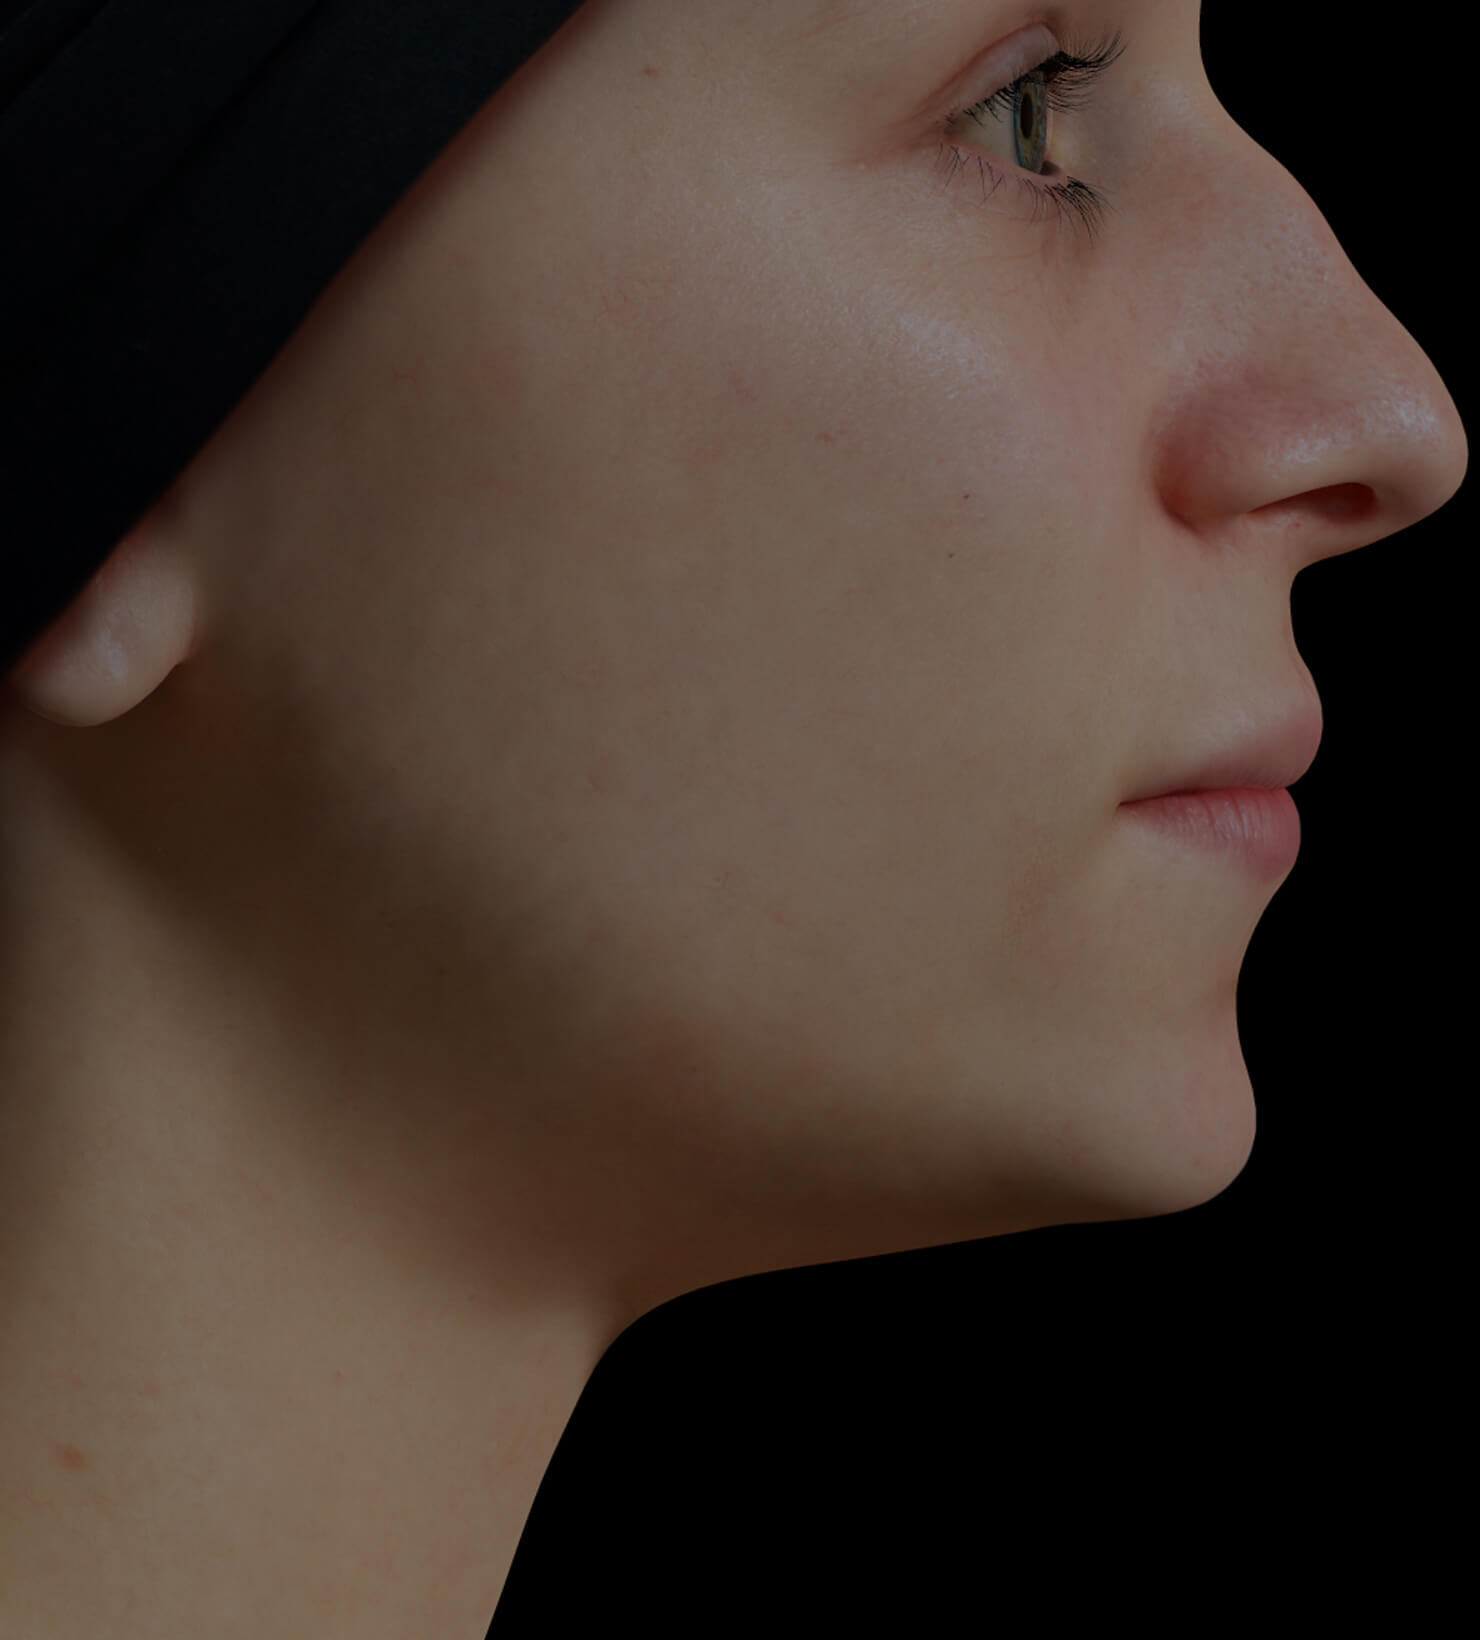 Clinique Chloé female patient with poor jawline definition treated with dermal filler injections for a more defined jawline